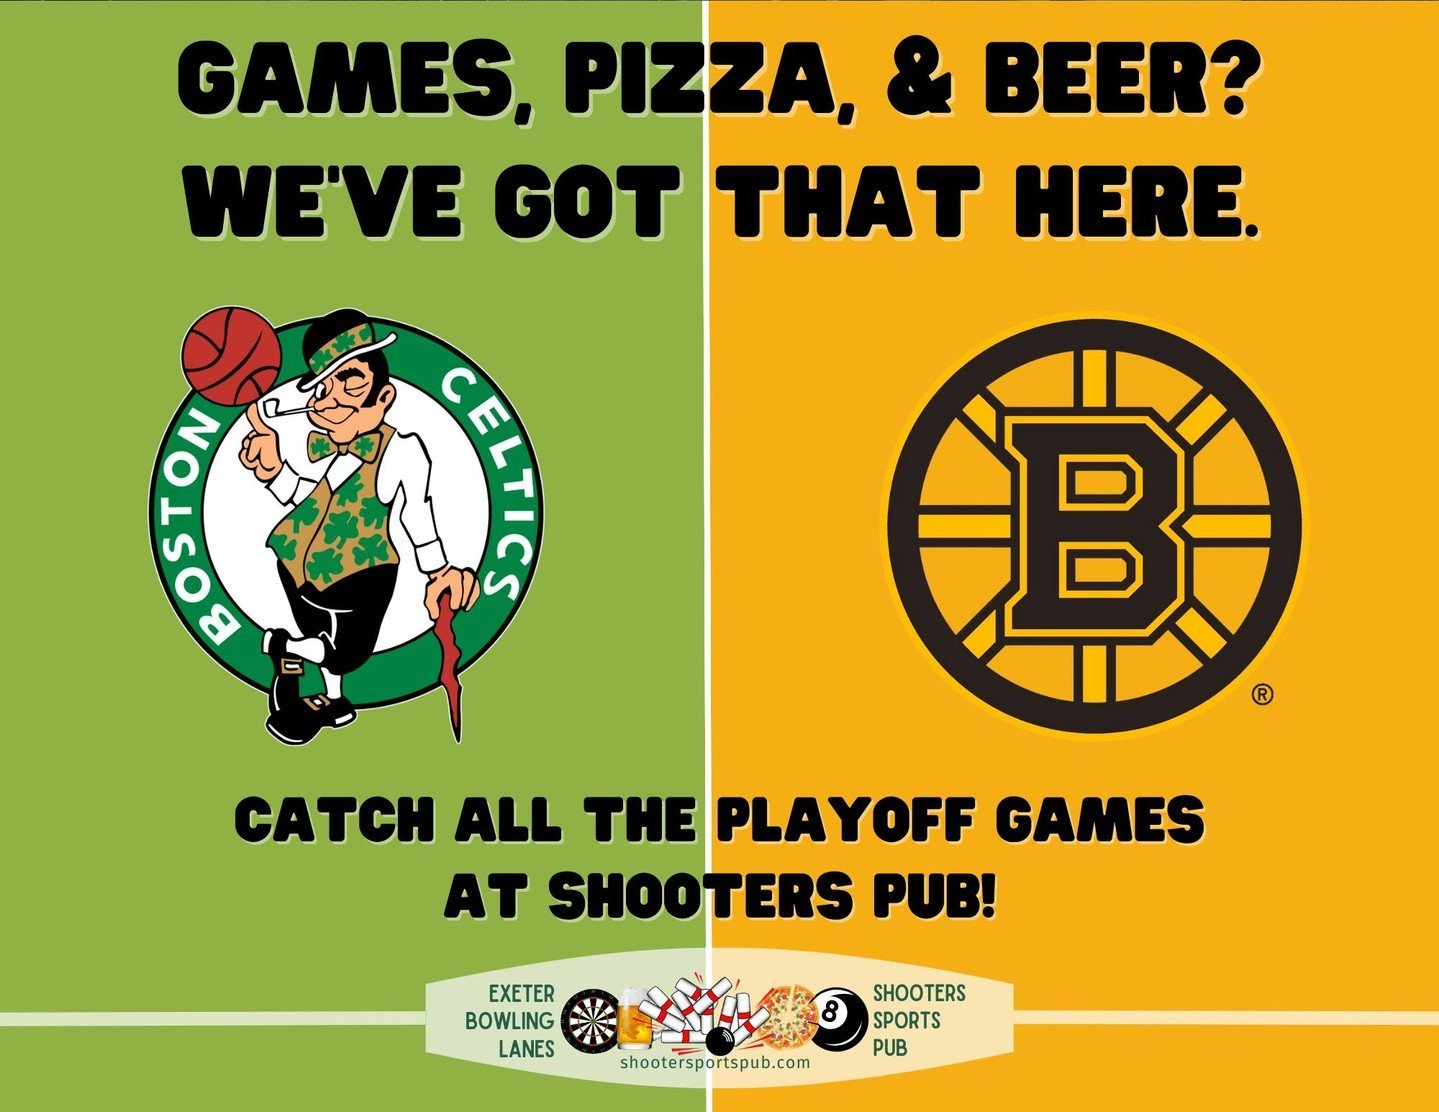 Weekend plan: Pizza 🍕, Beer 🍺, Playoff Games 🏒🏀. All available at Shooters Pub. ⁠
⁠
Where else would you want to be? ⁠
⁠
#WeekendVibes #PizzaAndPlayoffs⁠